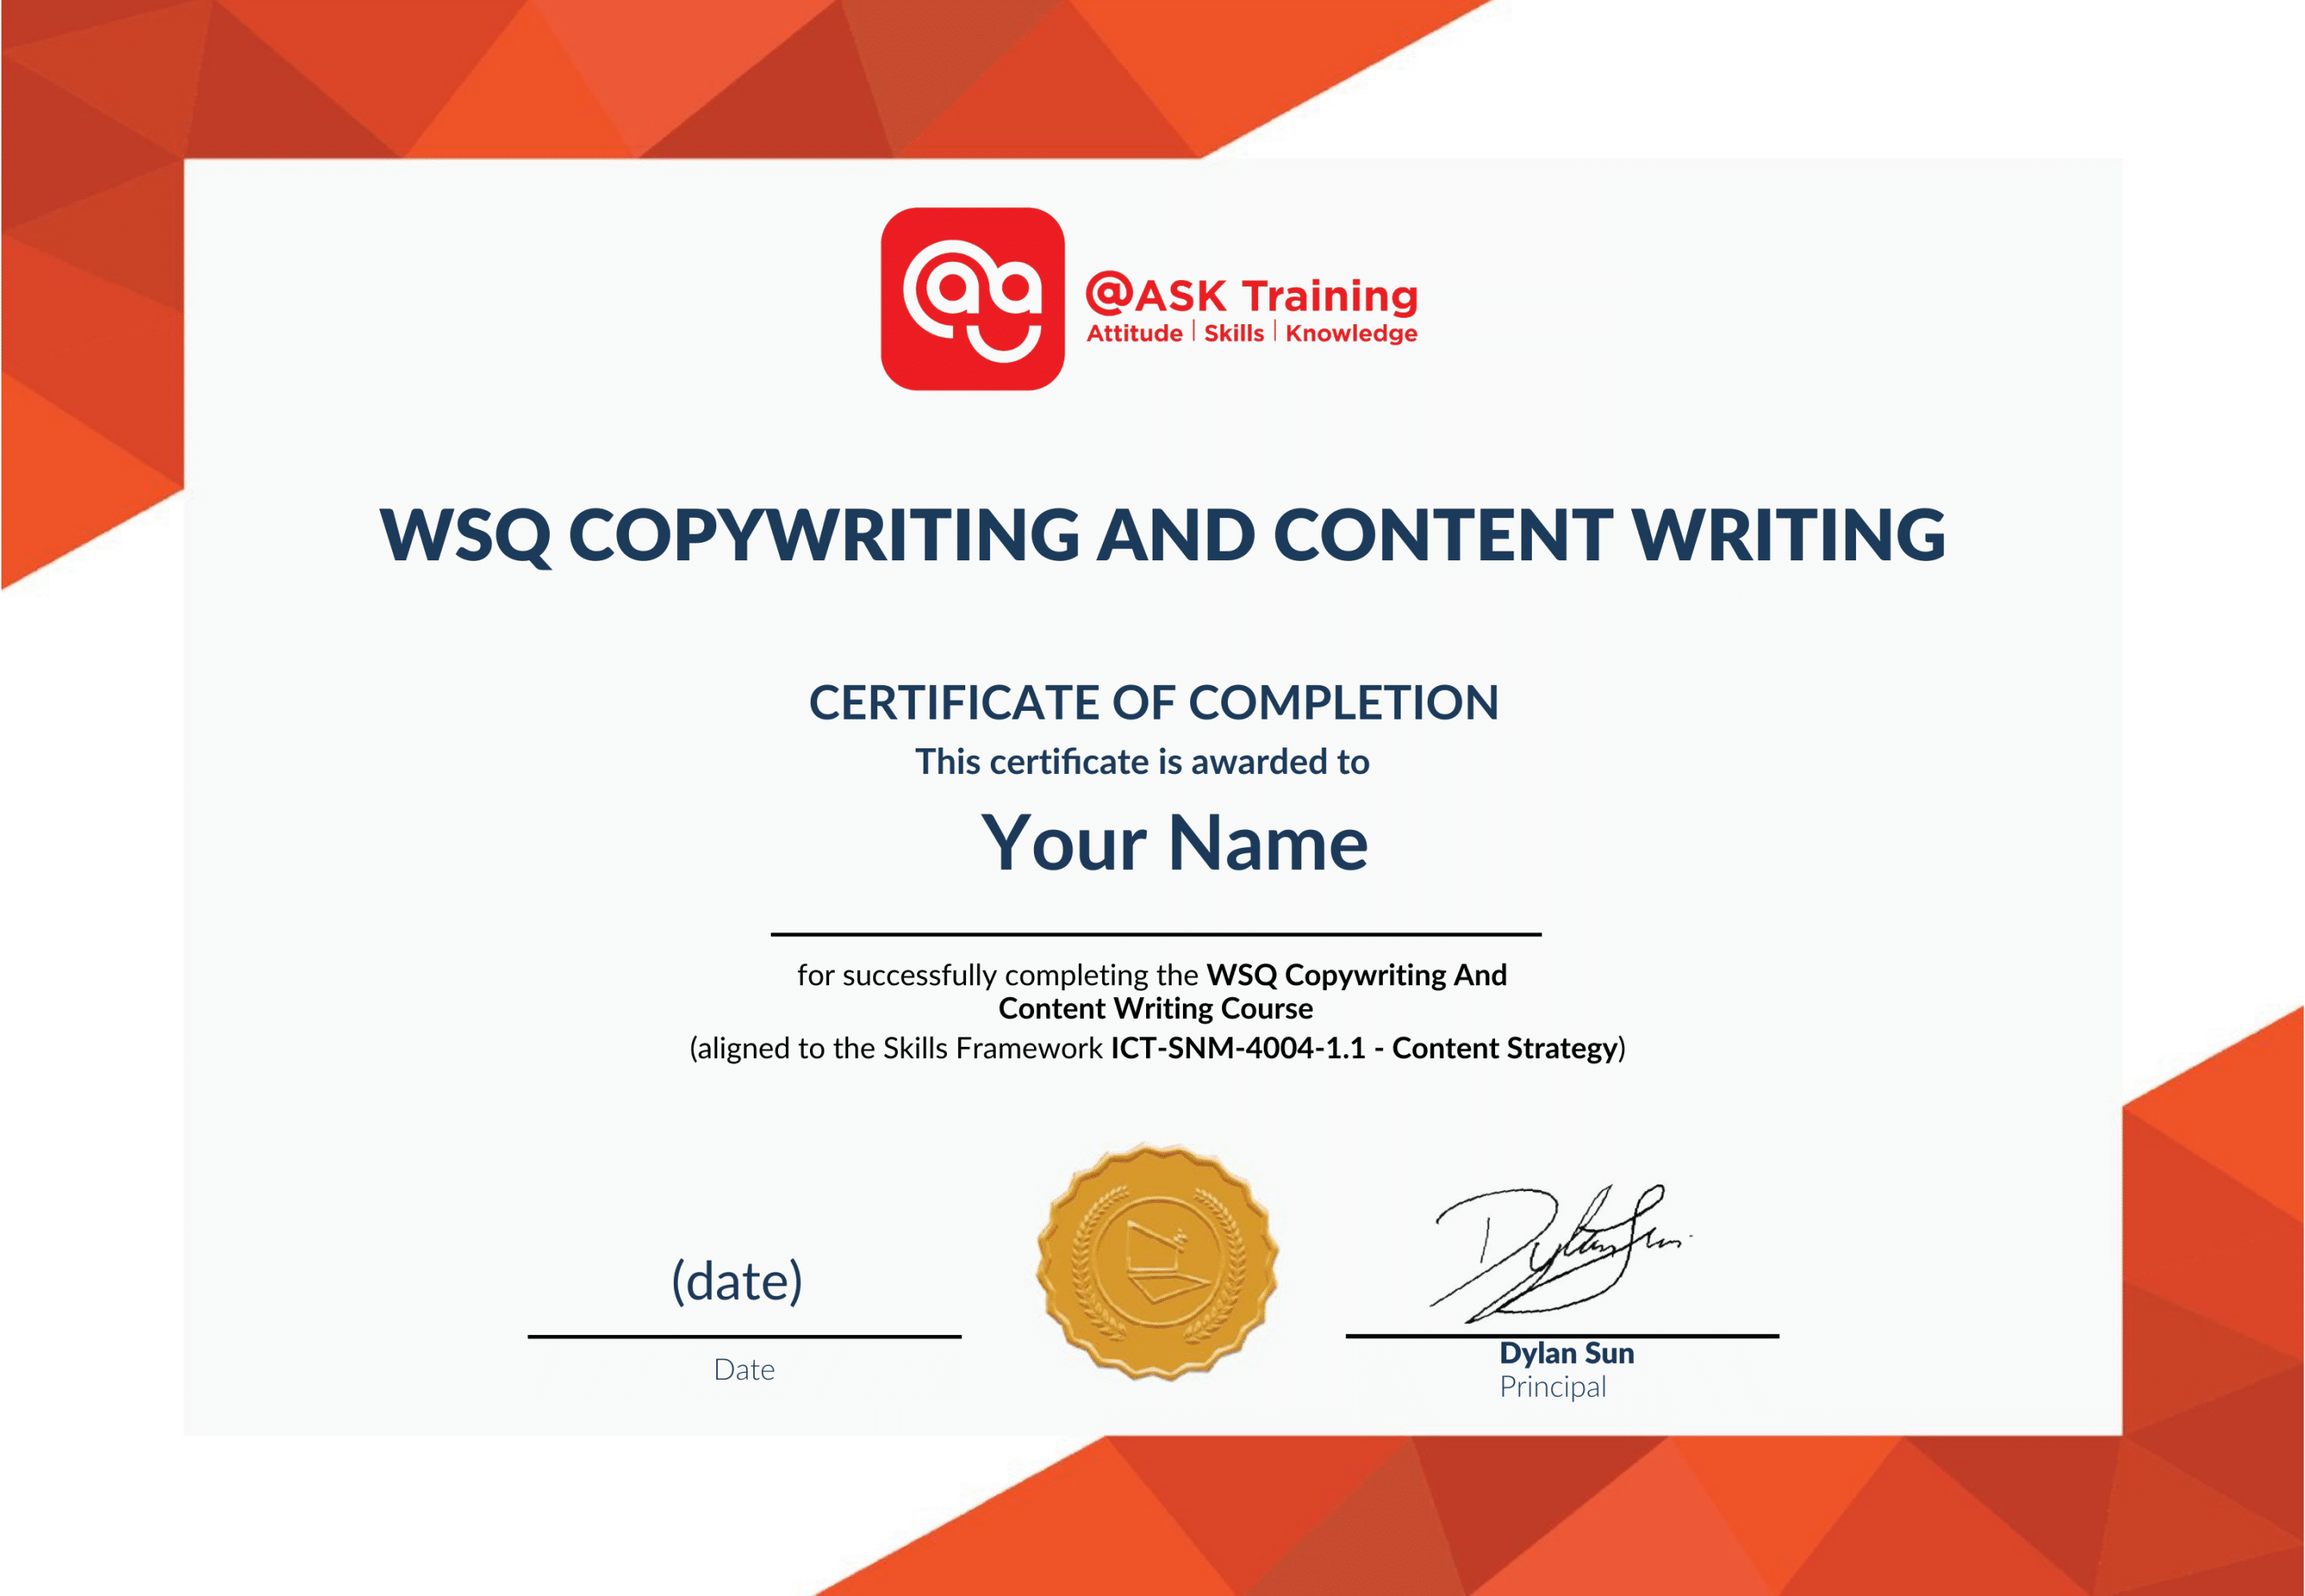 WSQ Copywriting and Content Writing Certificate Sample